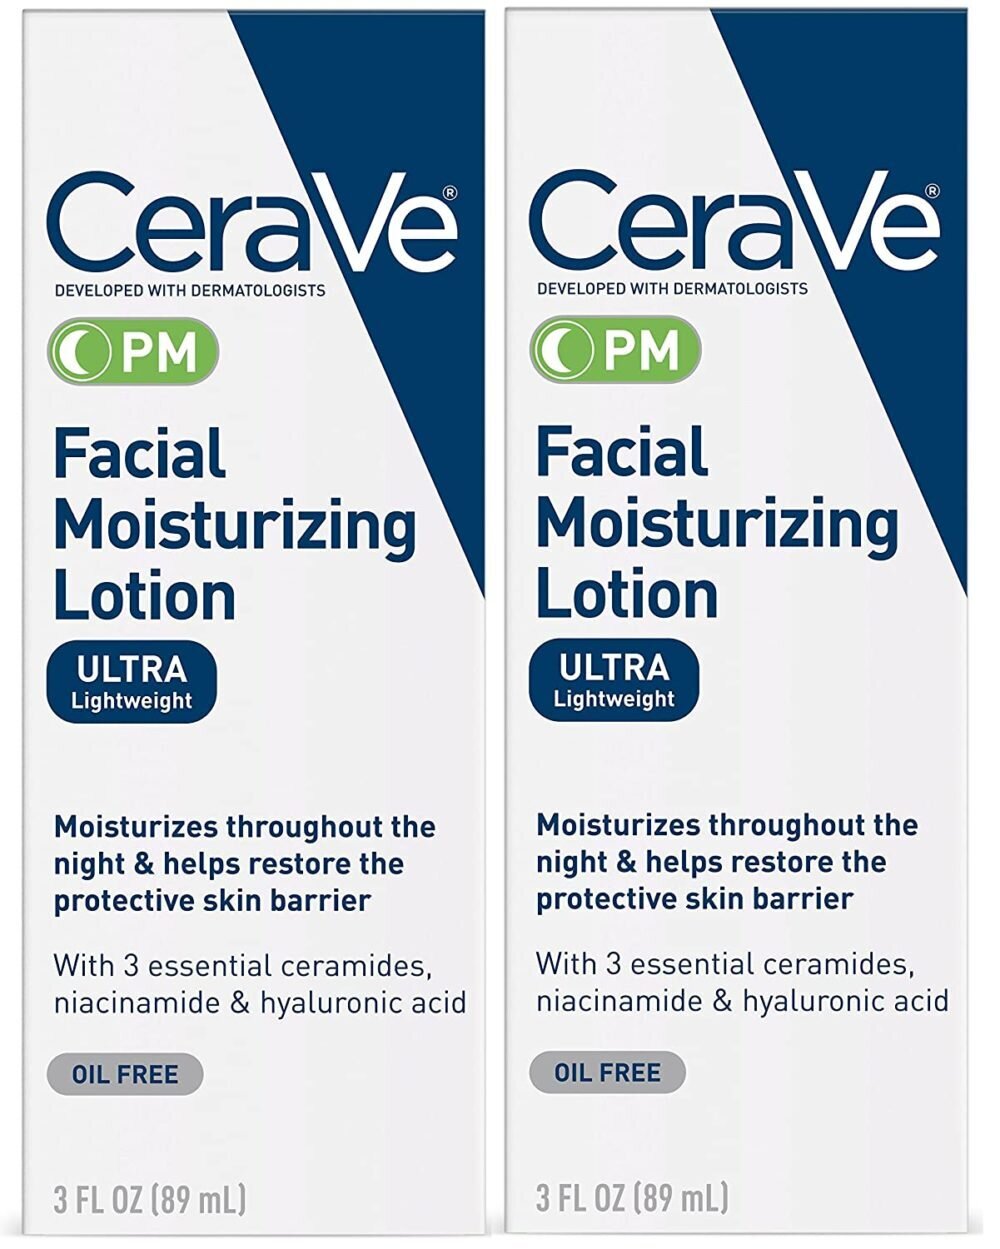 CeraVe PM Facial Moisturizing Lotion Ultra Lightweight Oil Free for Normal  to Dry Skin 3 fl